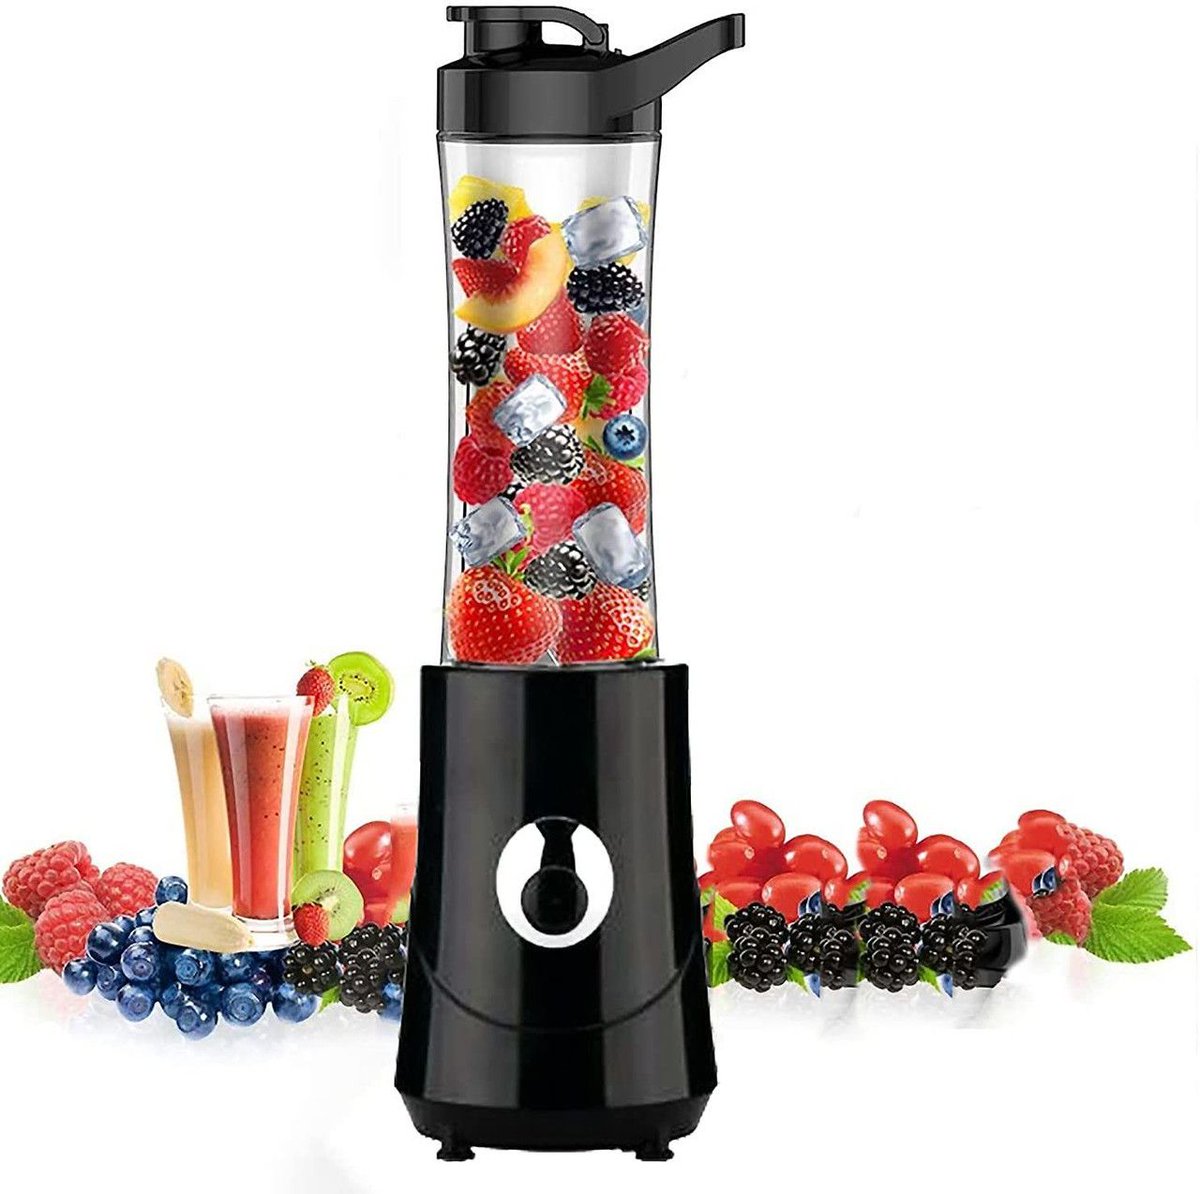 Take your smoothie along for the walk.  This personal juicer is the perfect size.
#freeshipping  #smoothieonthego  #bklynmadison.com